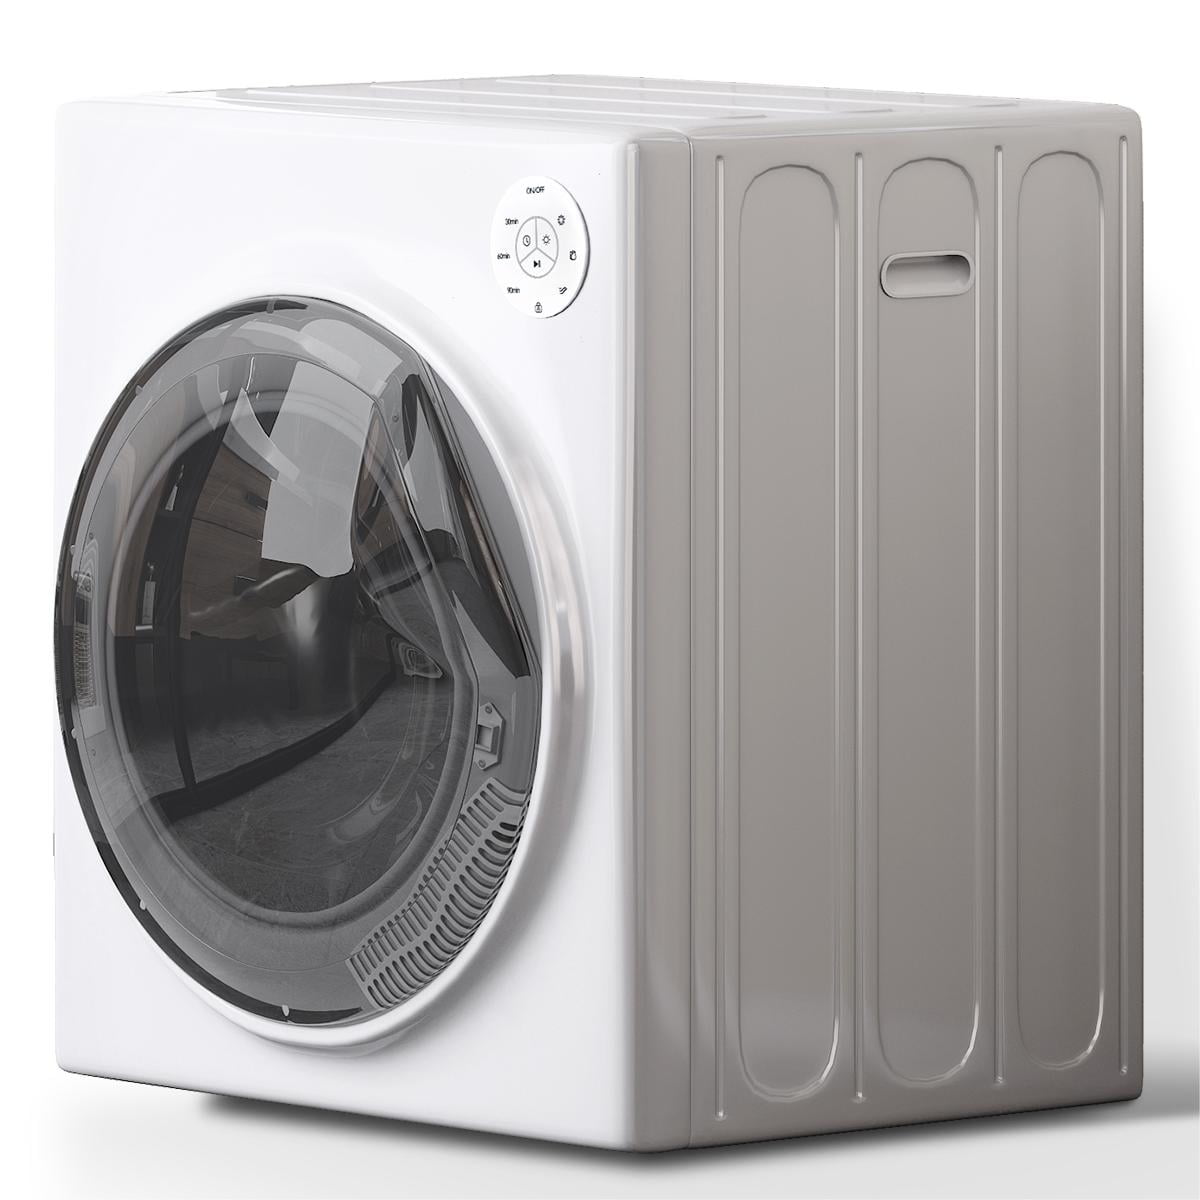 Tabu 13 lbs Electric Compact Dryer, Front Load Portable Laundry Dryer with Stainless Steel Tub, Clothes Dryer for Apartments, White, Size: 23.62 x